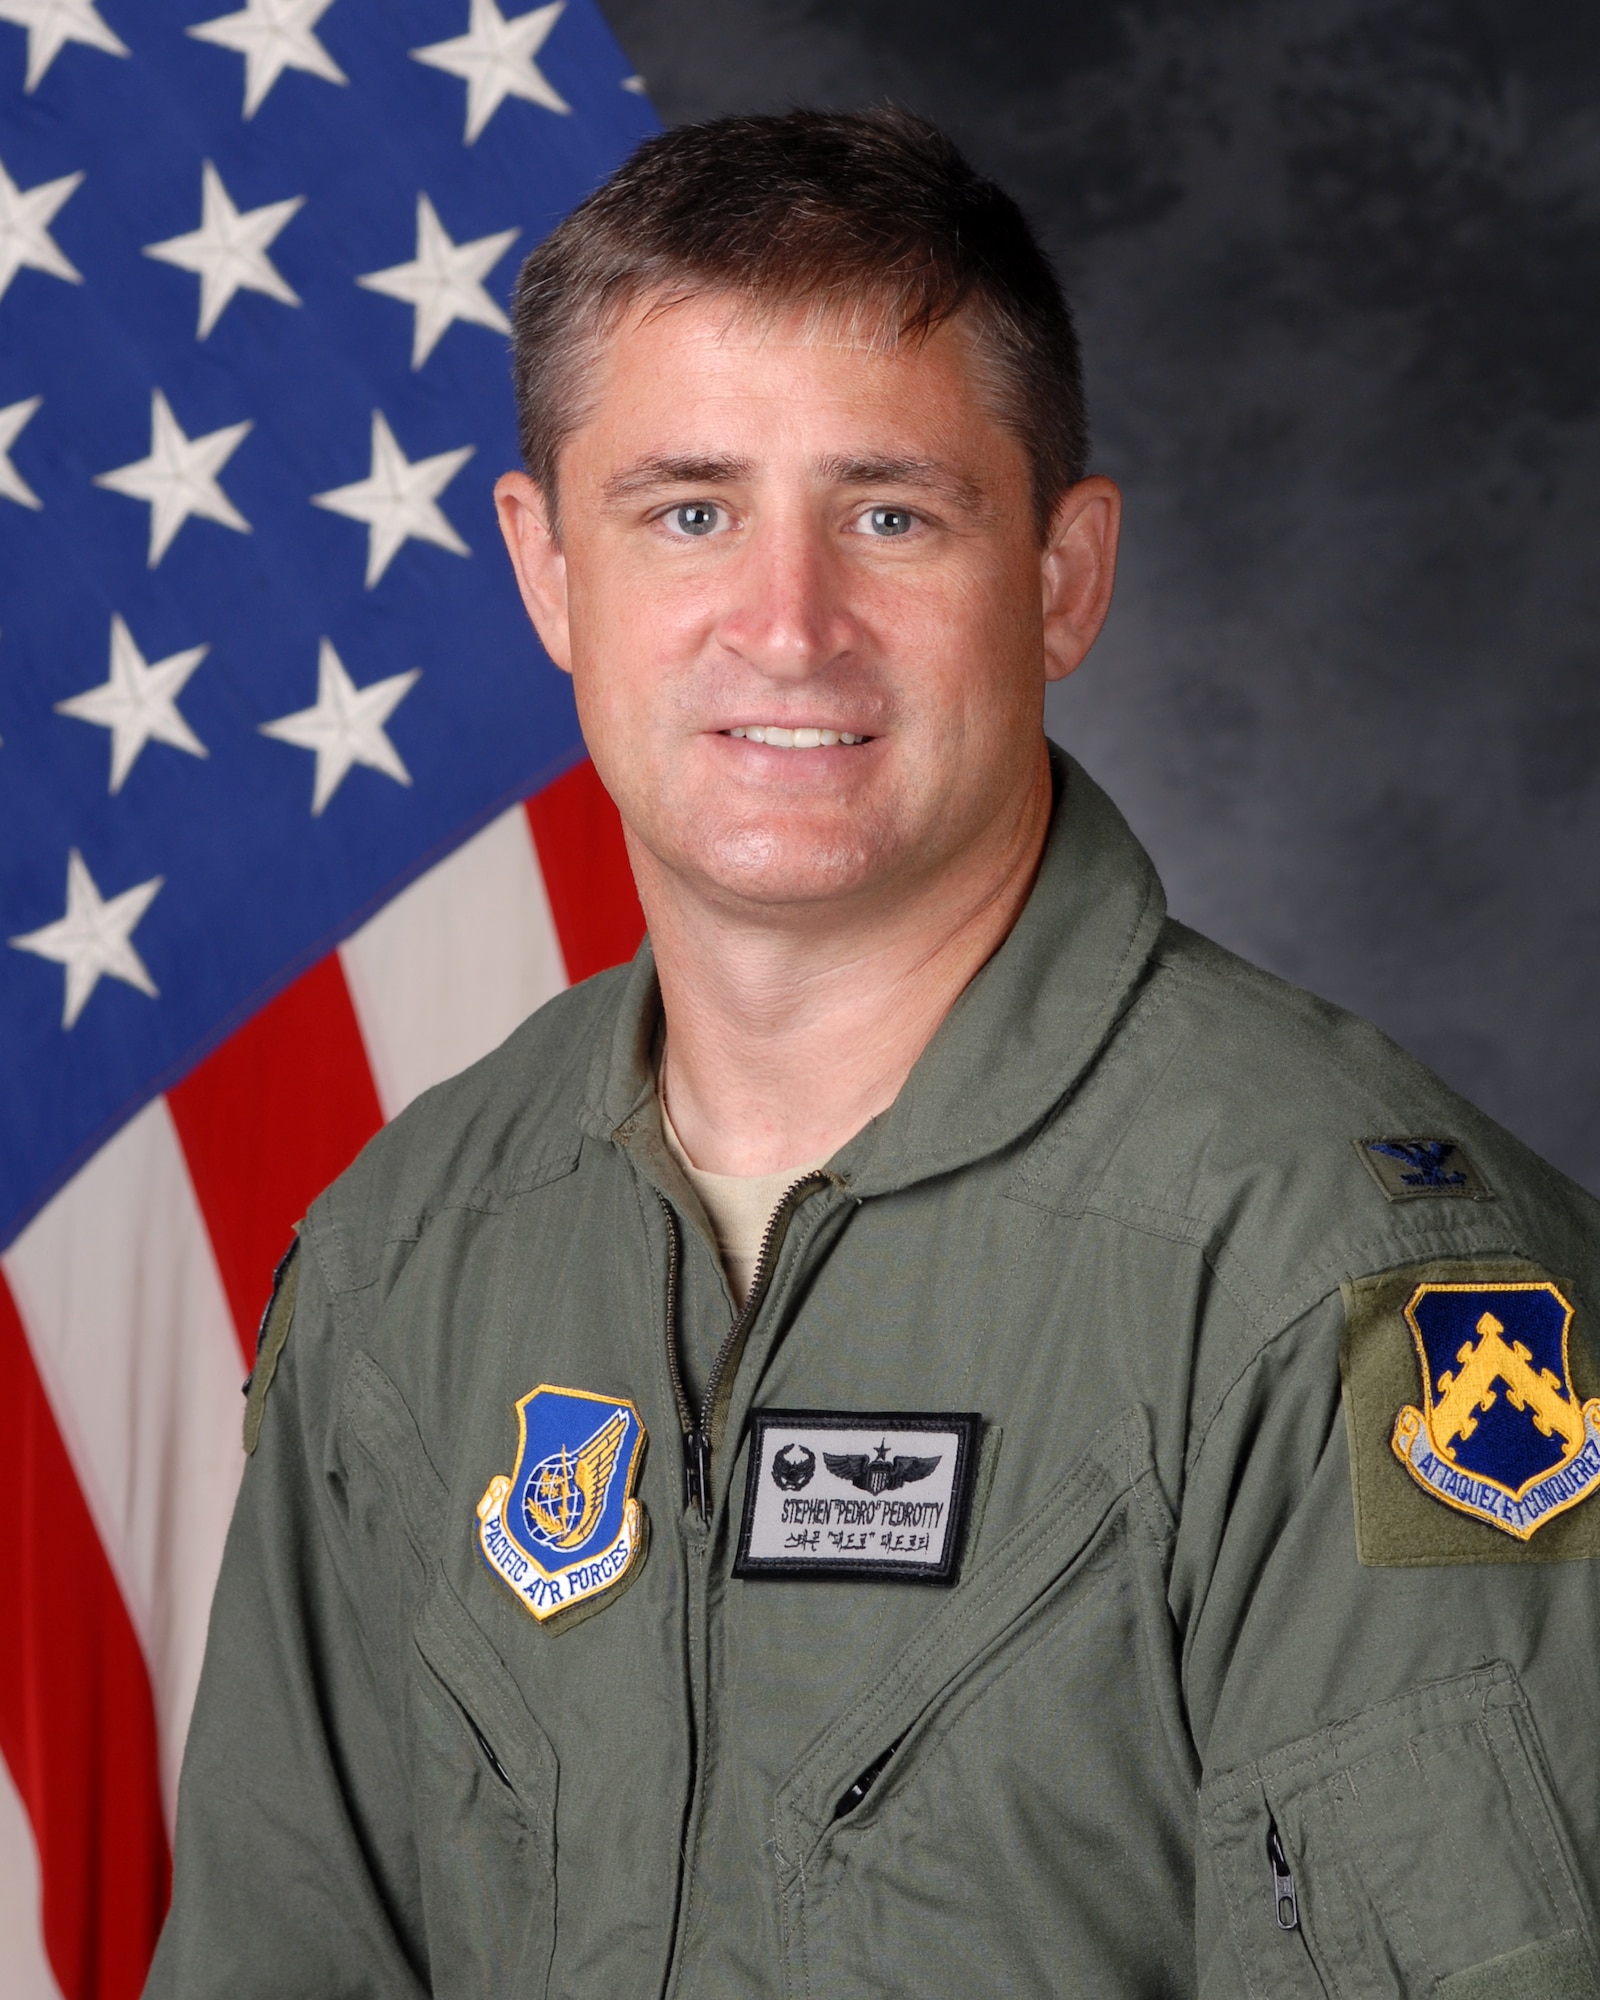 Col. Stephen Pedrotty is the 8th Operations Group commander at the 8th Fighter Wing, Kunsan Air Base, Republic of Korea.  